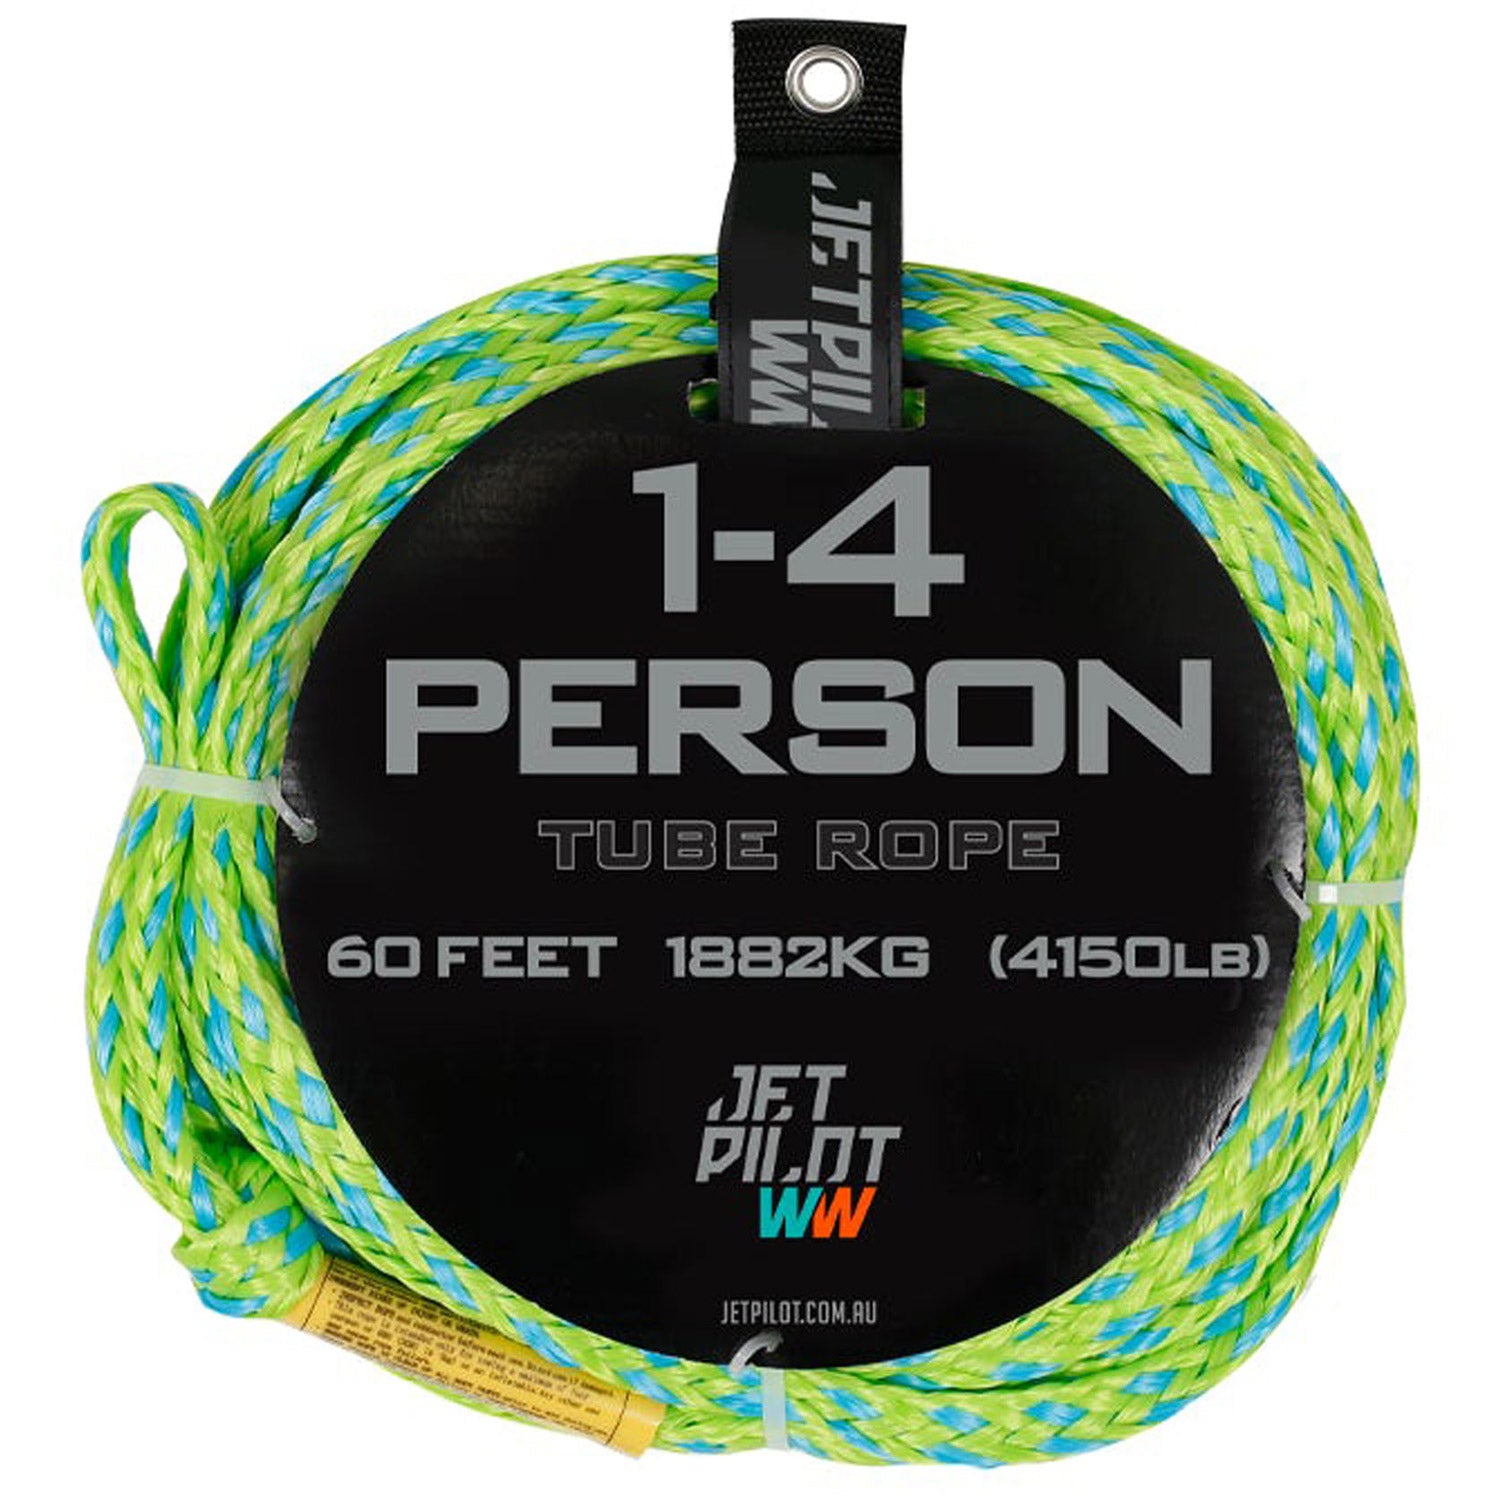 1-4 Person Tube Rope - Green